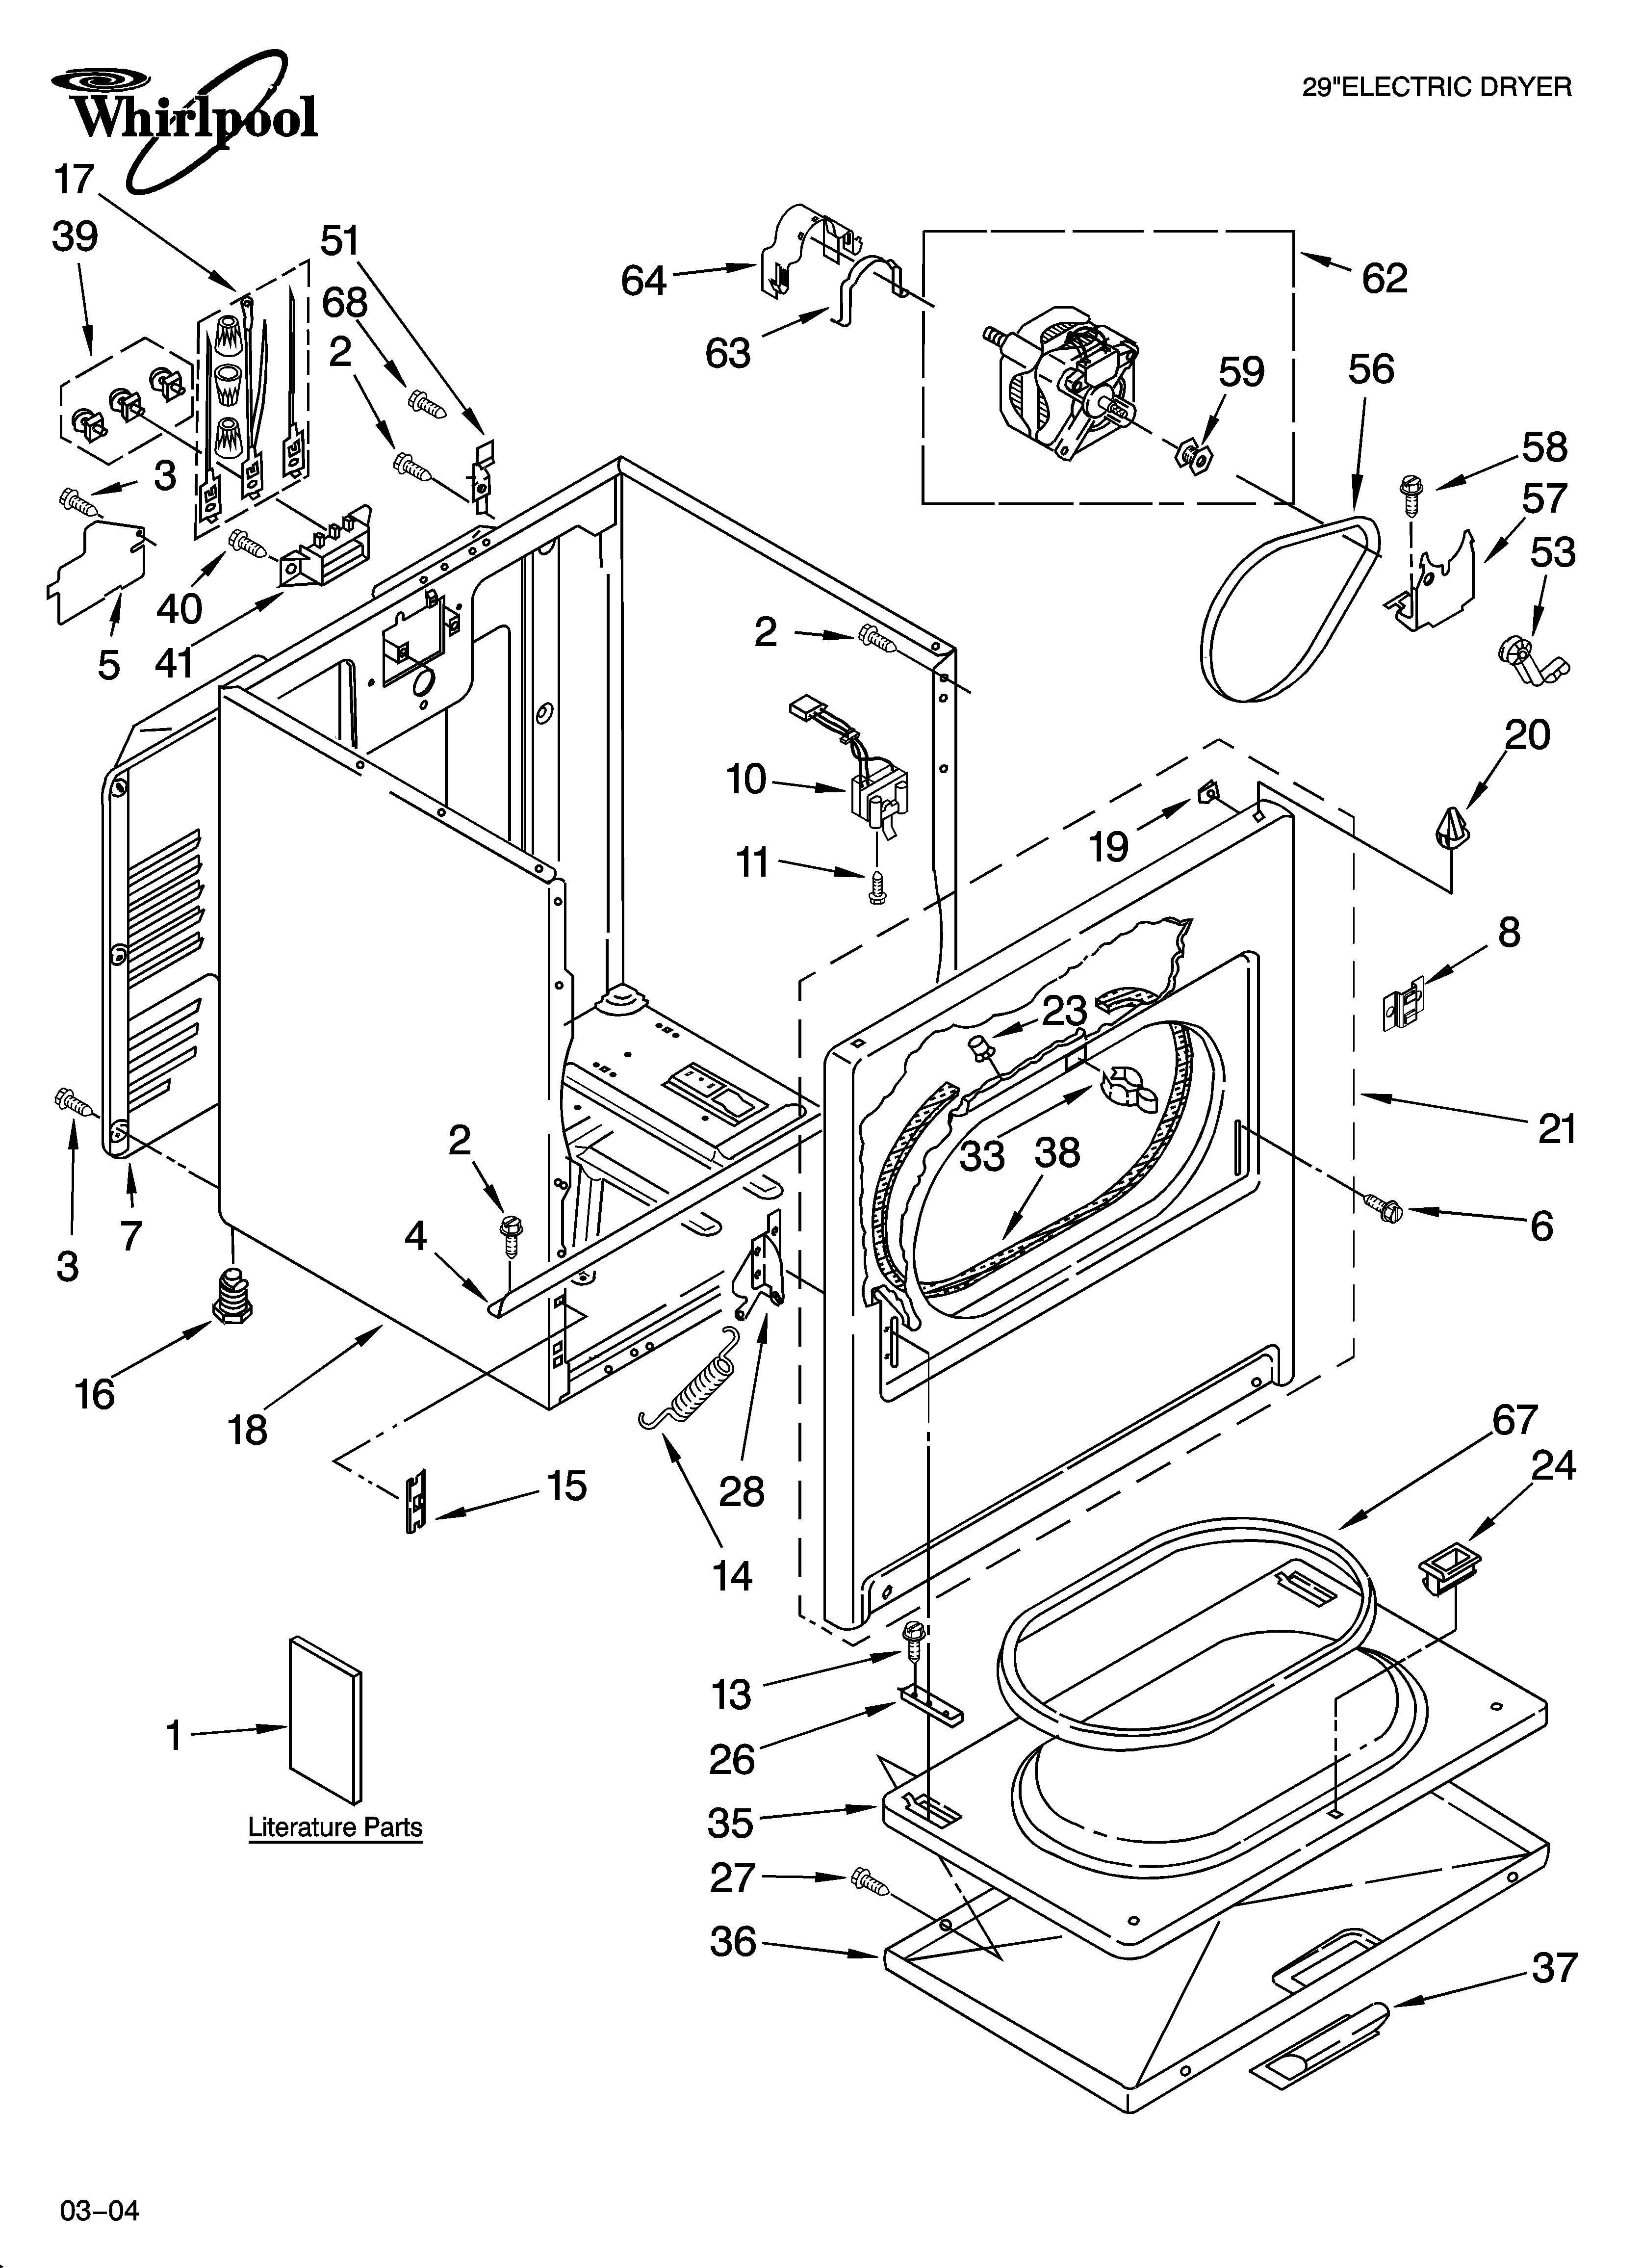 Whirlpool Residential Dryer Parts